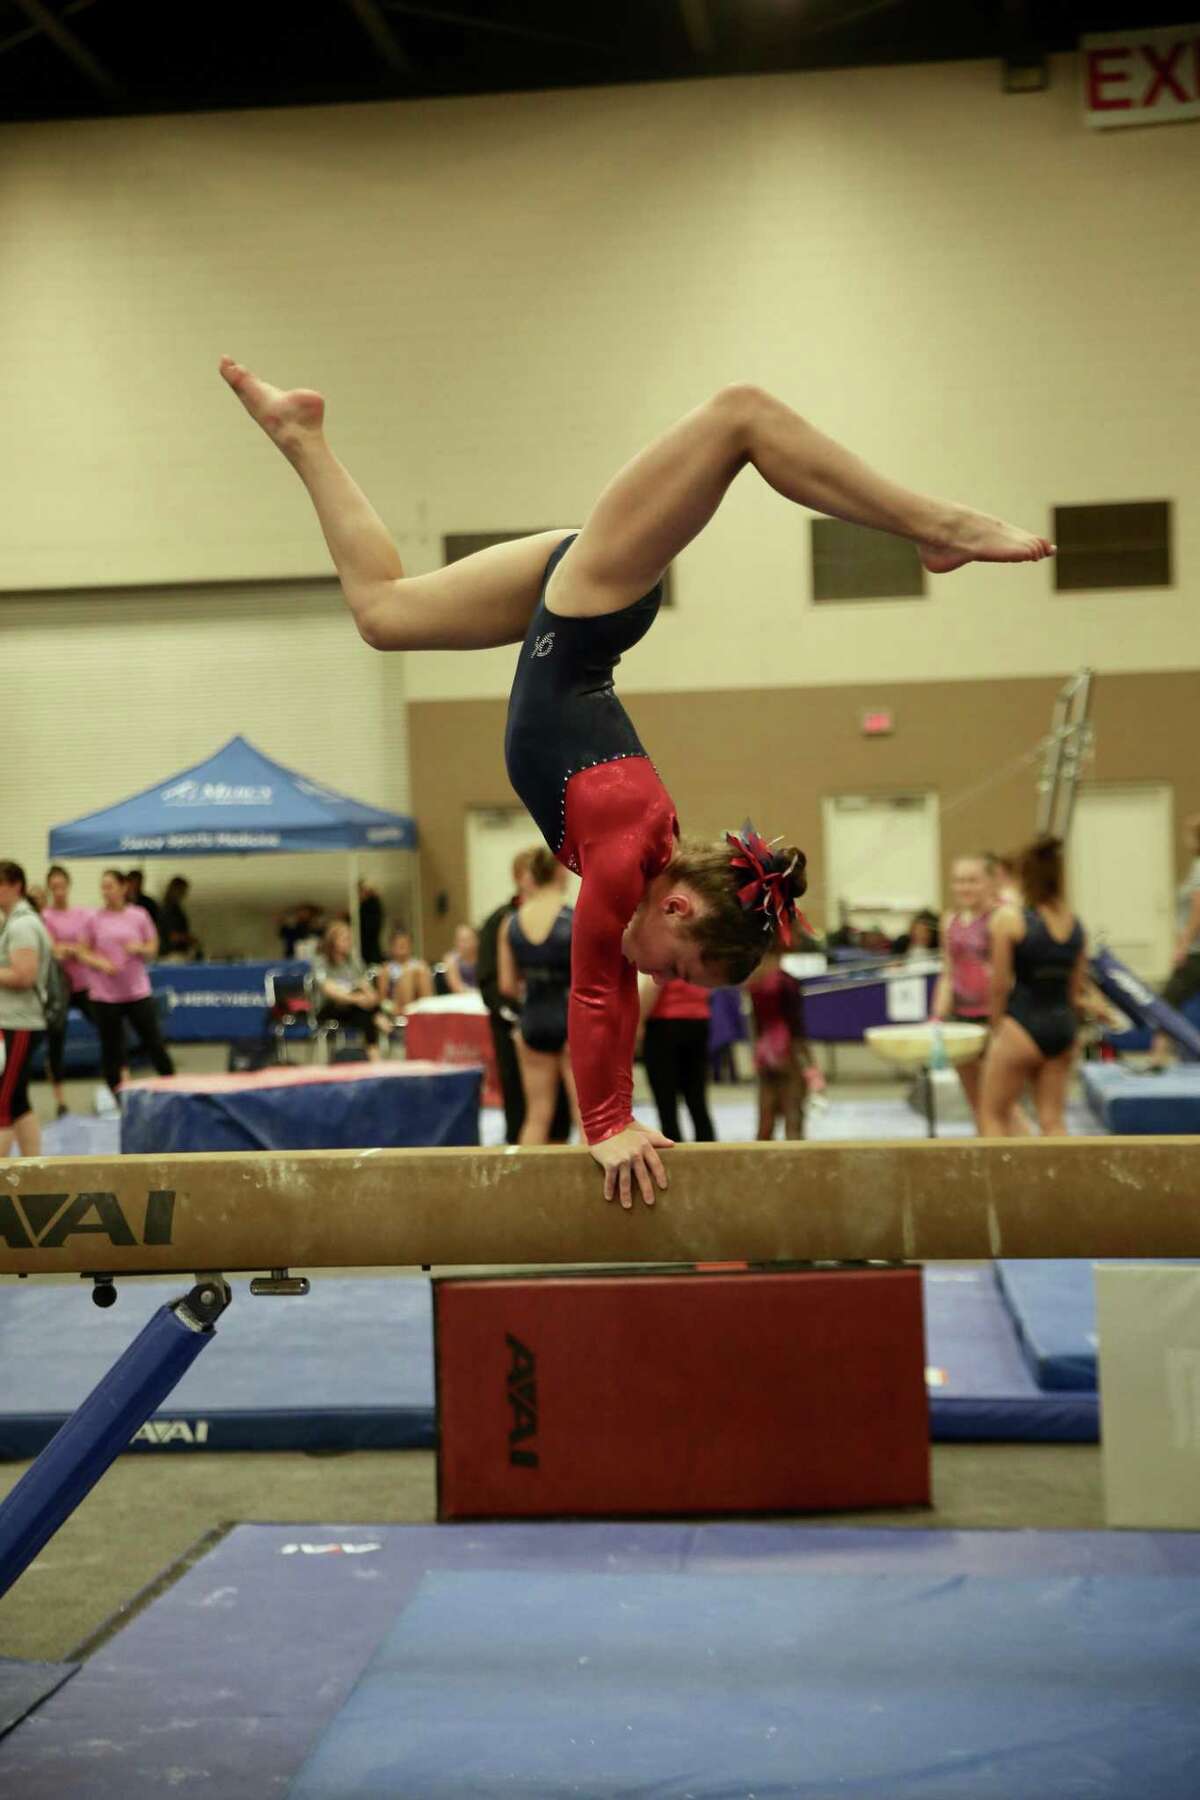 Darien YMCA Level 8 gymnast Sarah Cross scored 9.325 for her beam routine and qualified for the All-Around finals where she placed ninth at the 2018 YMCA National Championships in Toledo.